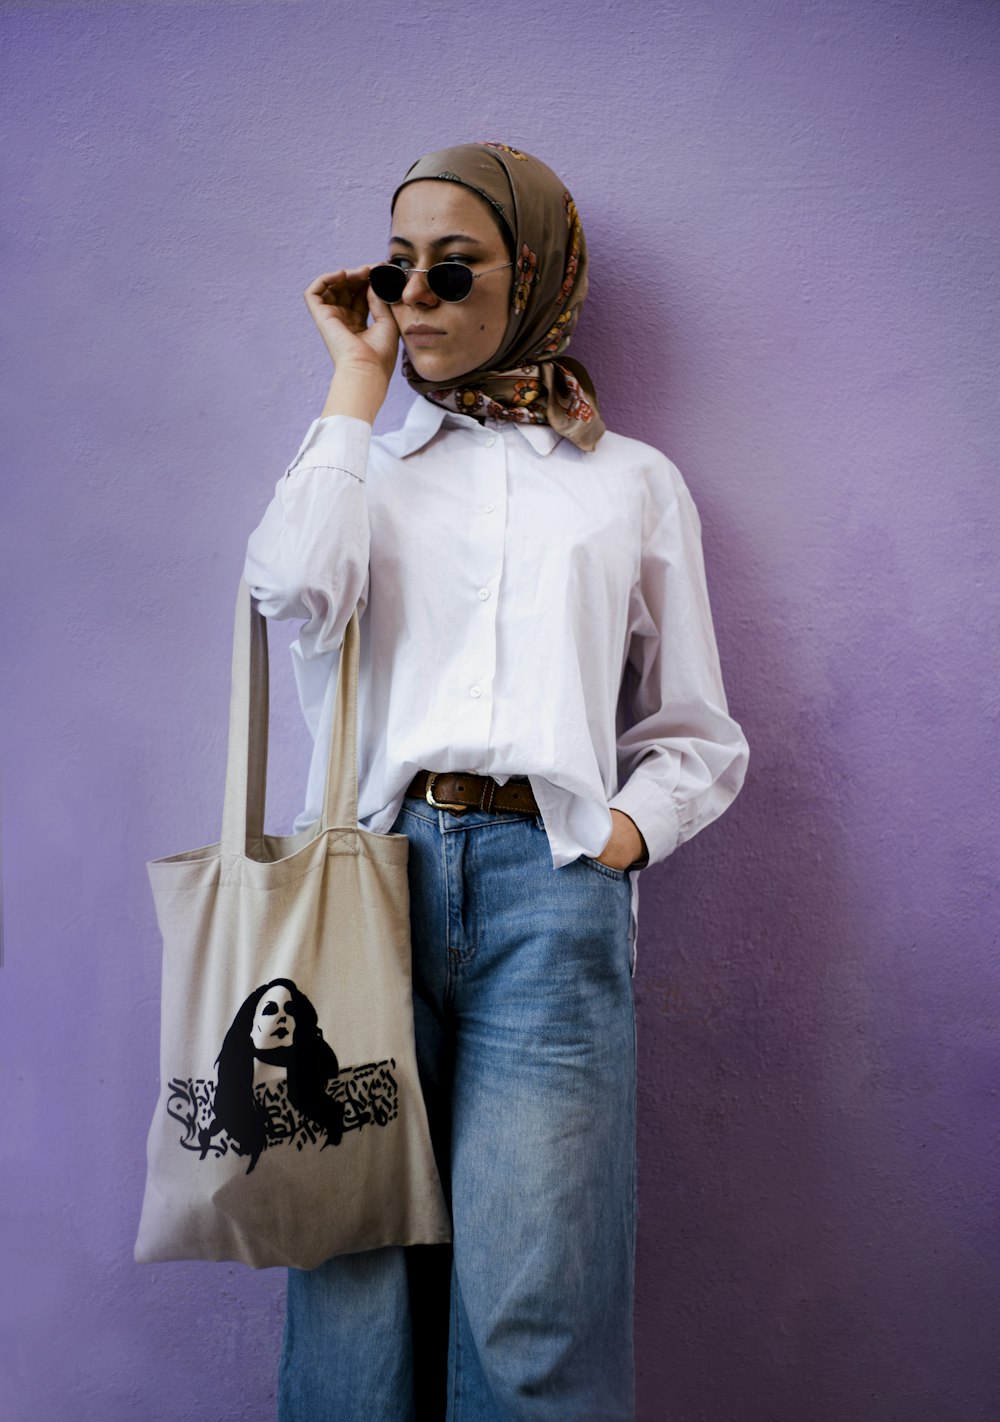 a woman wearing a headscarf and holding a tote bag